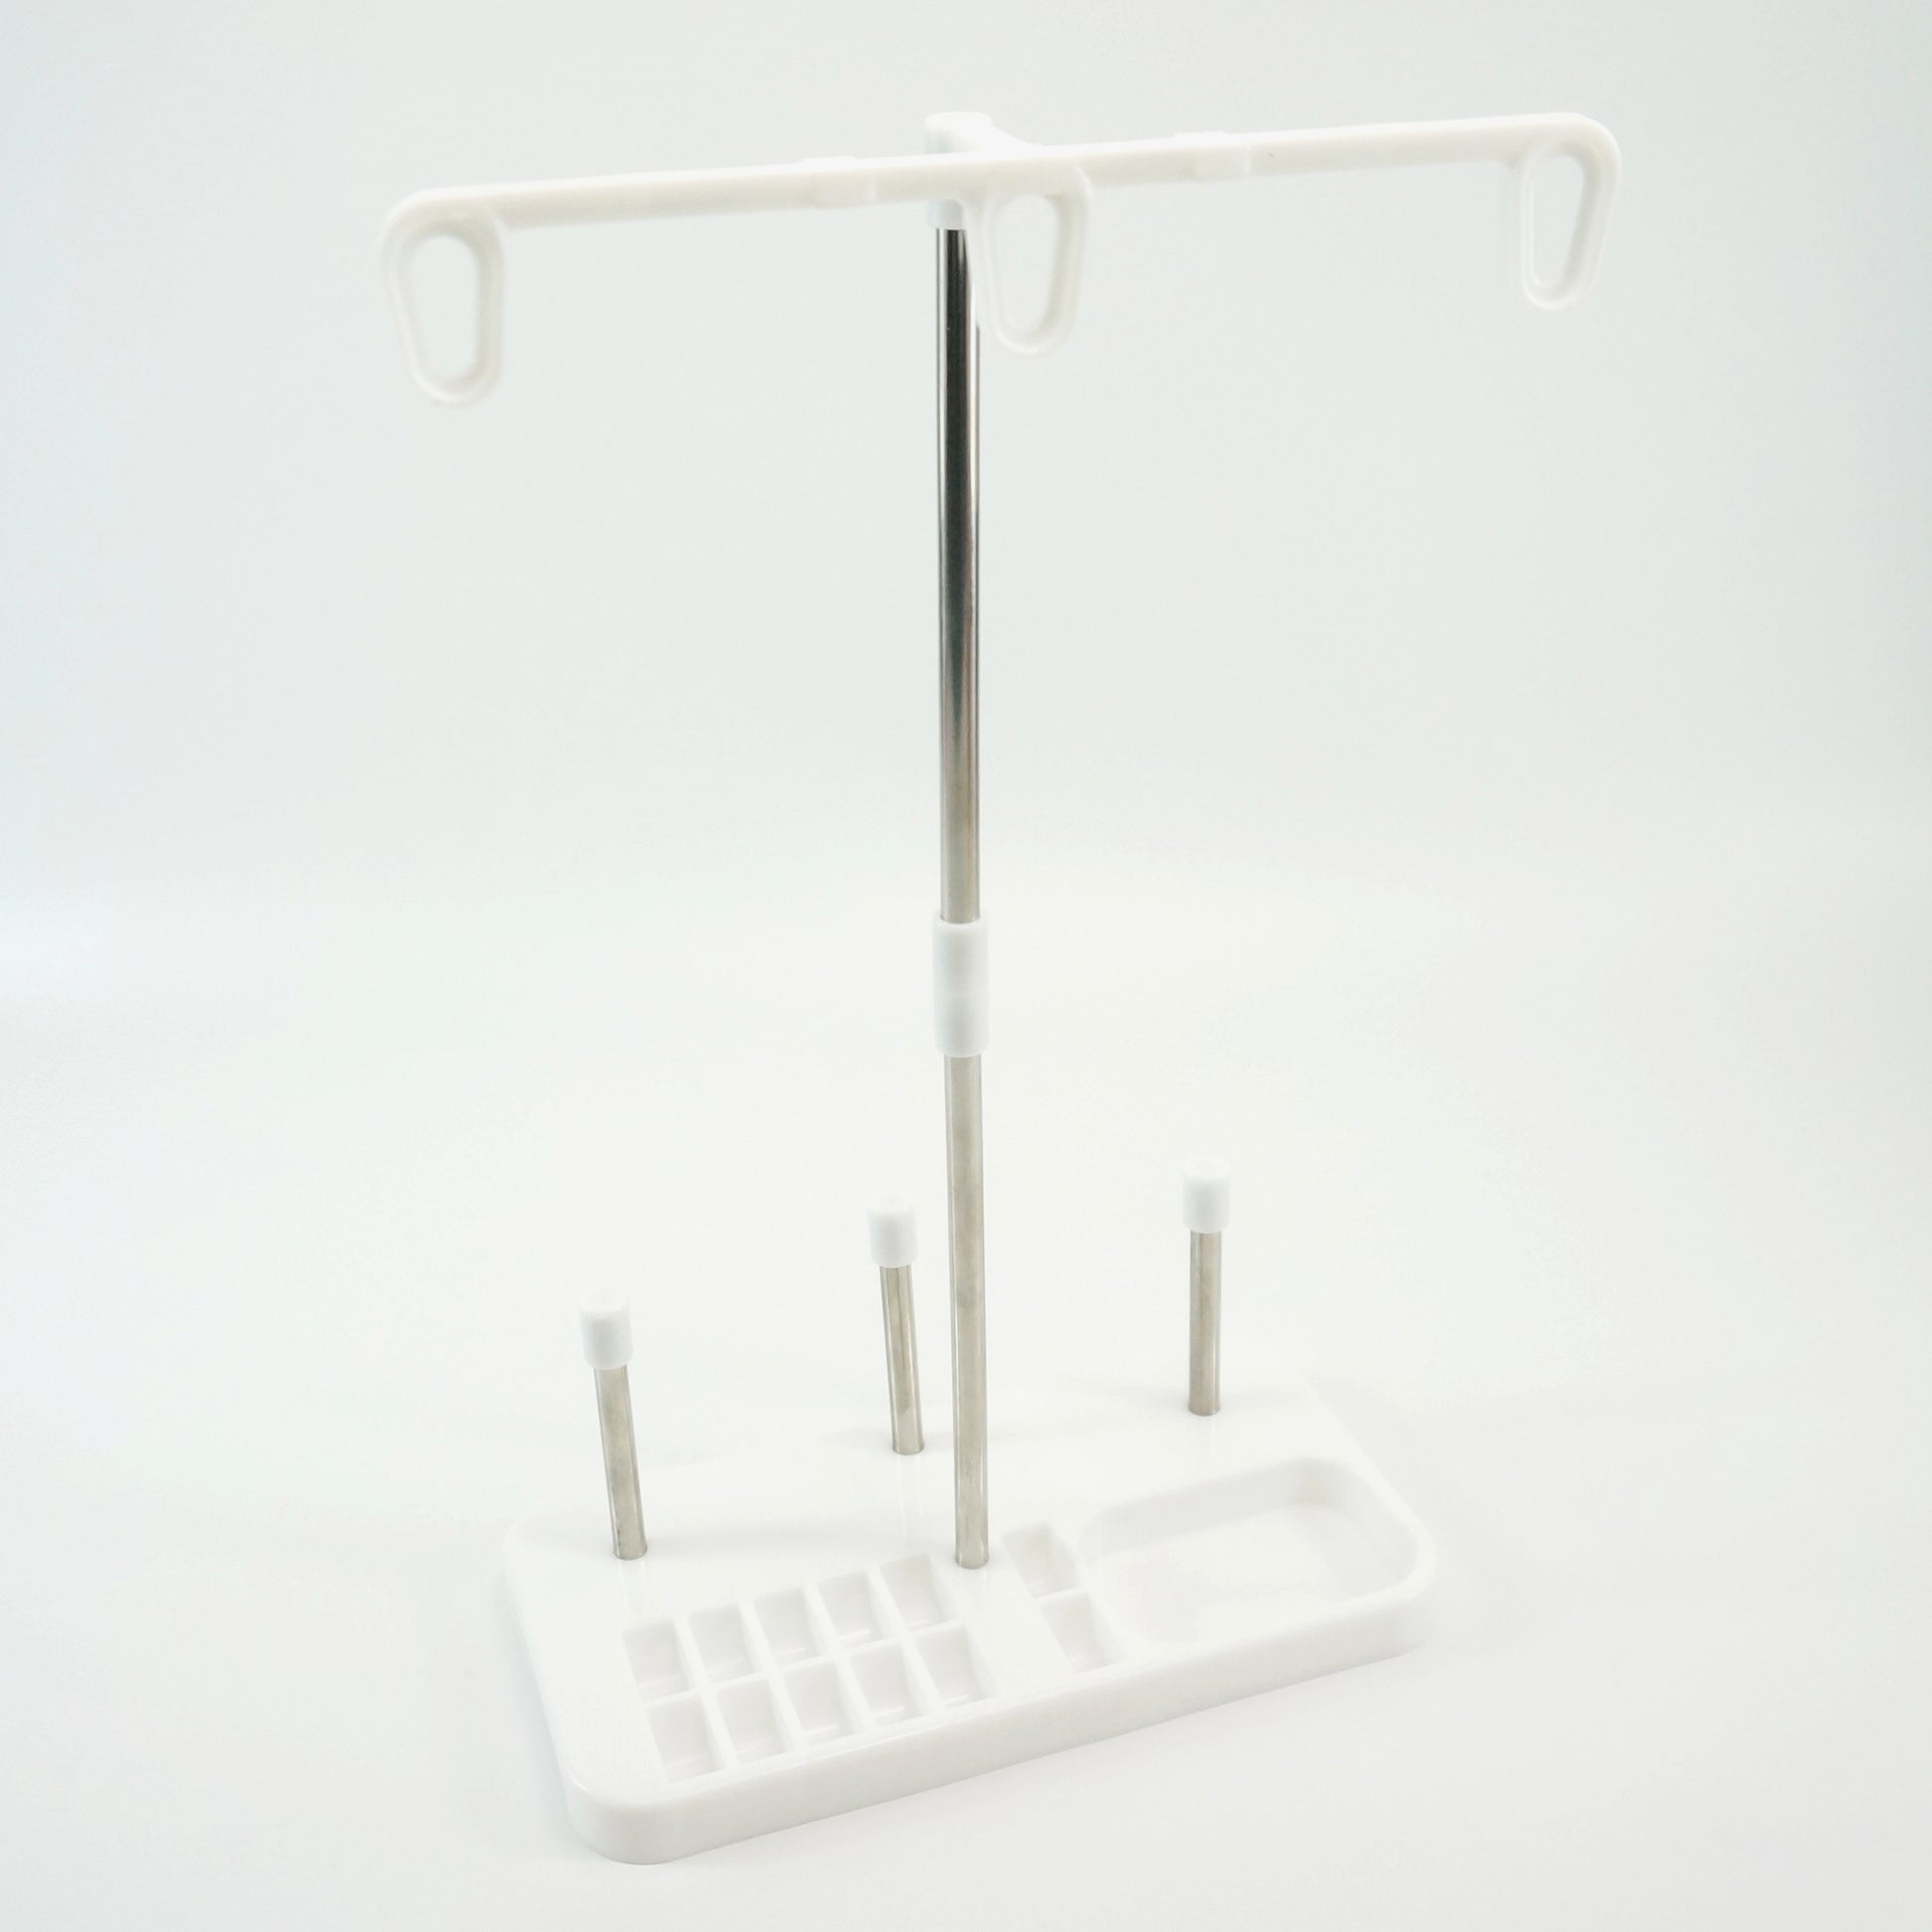 Adjustable C Thread Stand Spool Holder for Sewing Machine Embroidery  Quilting Serger Machines, Thread Smoother Feed, Large Spool Holder